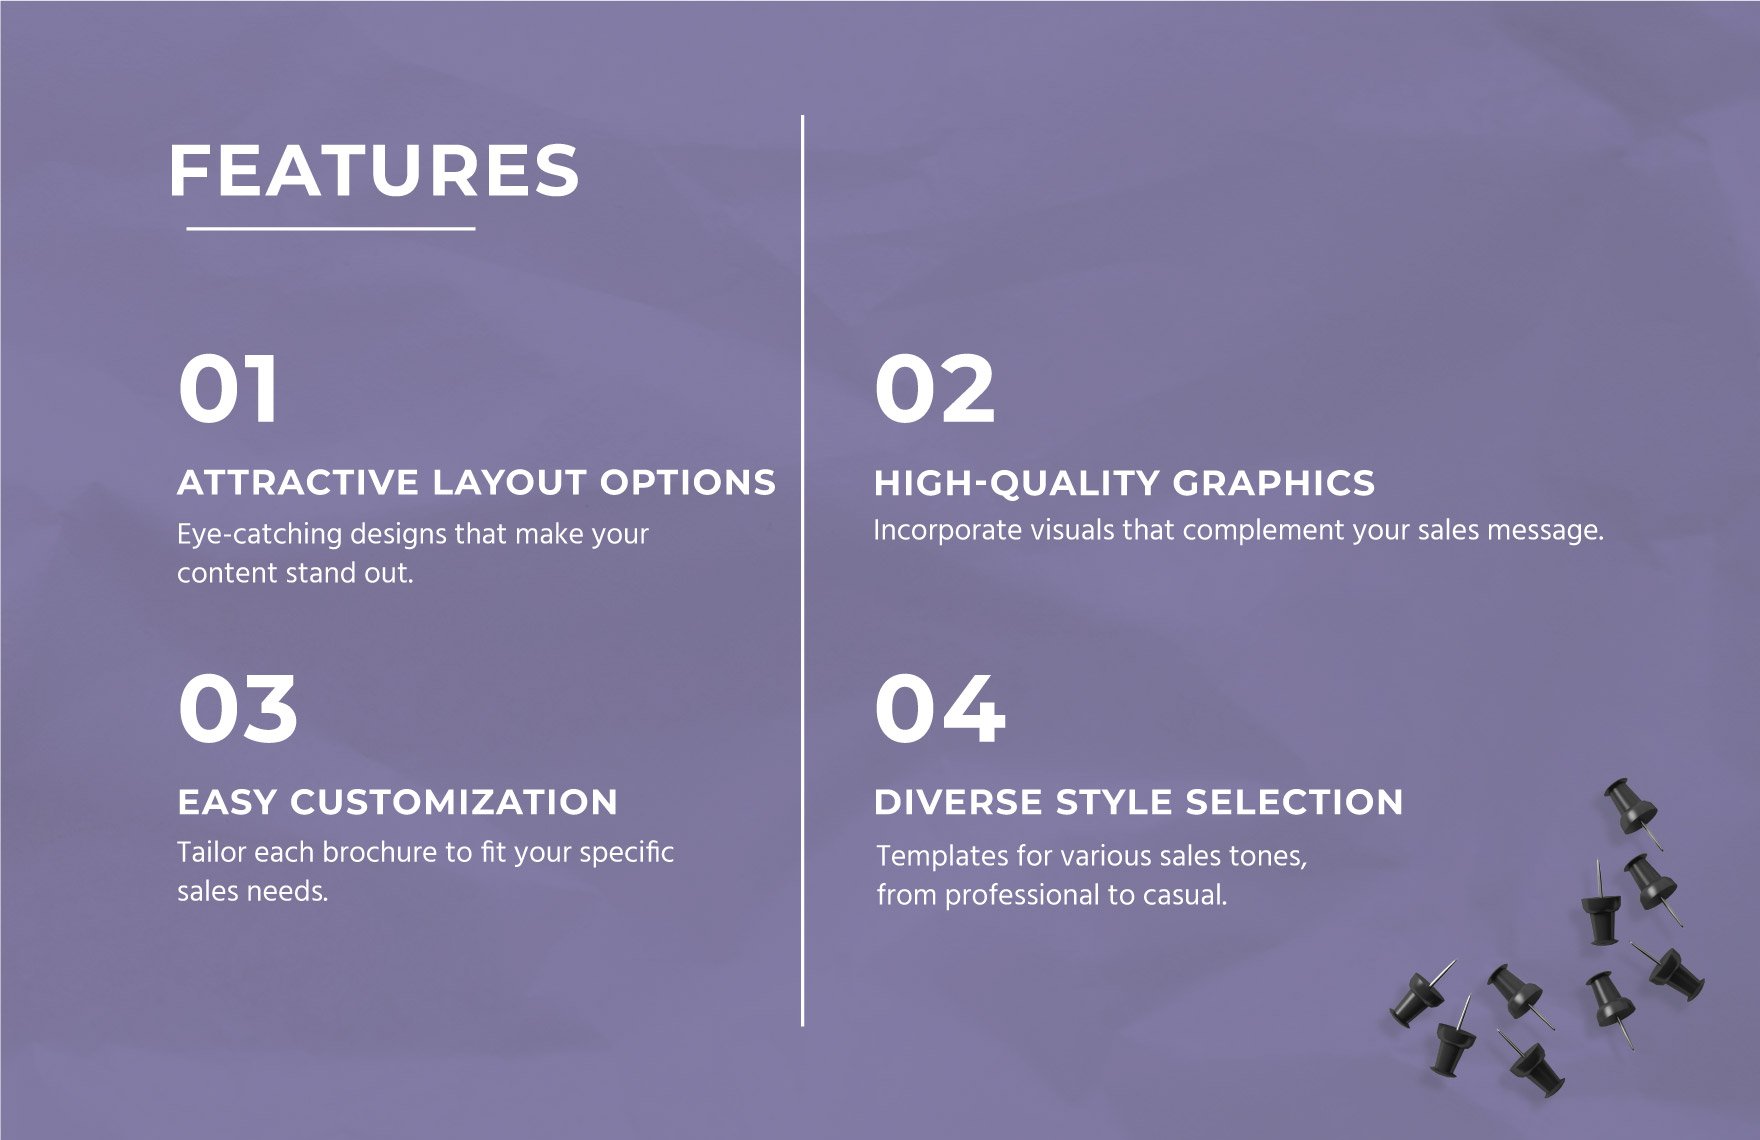 Sales Product Features and Benefits Brochure Template